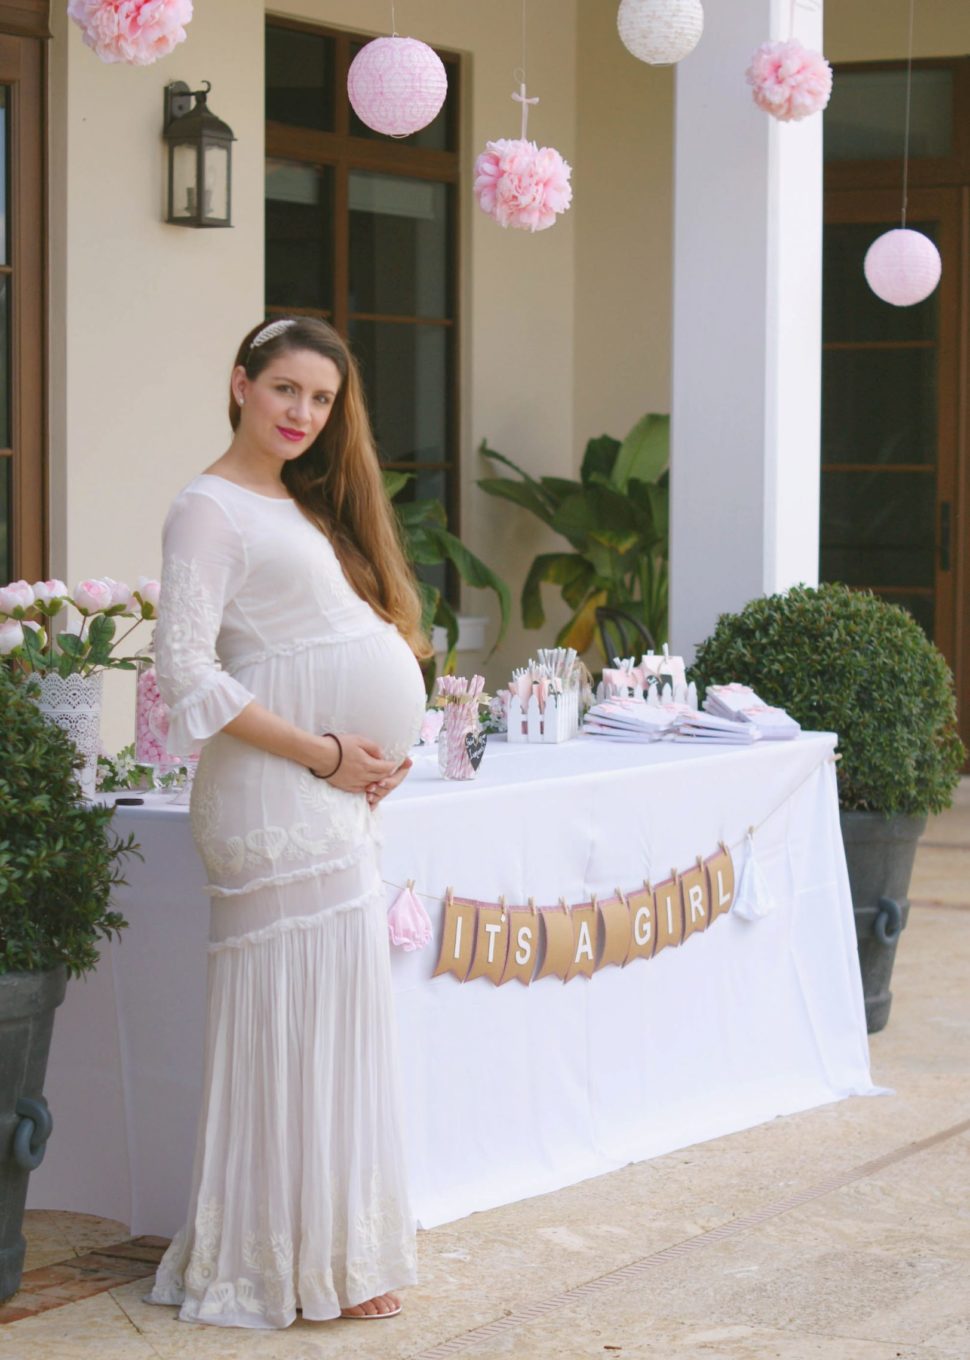 Medium Size of Baby Shower:maternity Boutique Cute Maternity Dresses For Baby Shower Affordable Maternity Dresses For Baby Shower What To Wear To My Baby Shower Maternity Blouses For Baby Shower Plus Size Maternity Dresses For Baby Shower What Should I Wear To My Baby Shower Plus Size Maternity Clothes